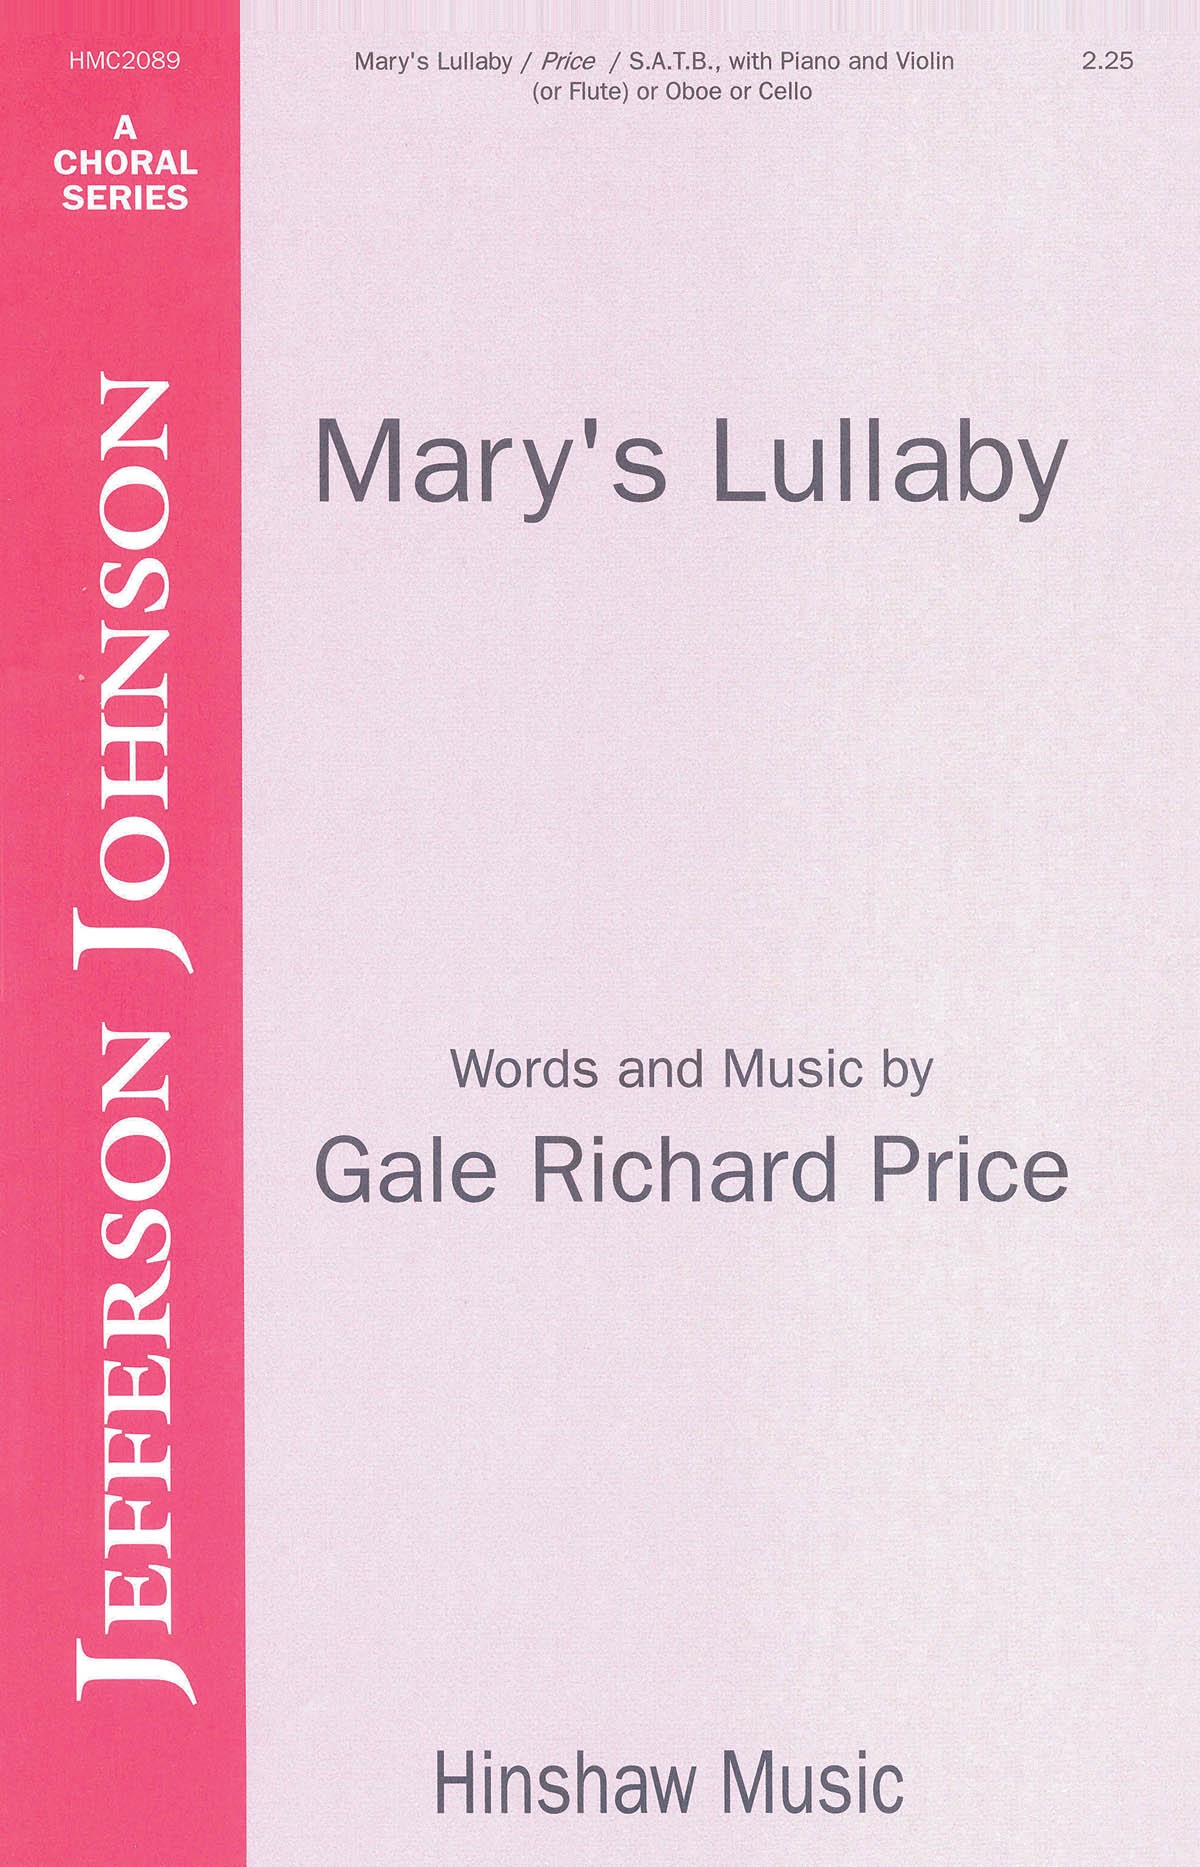 Gale (Mr.) Price: Mary's Lullaby: SATB: Vocal Score